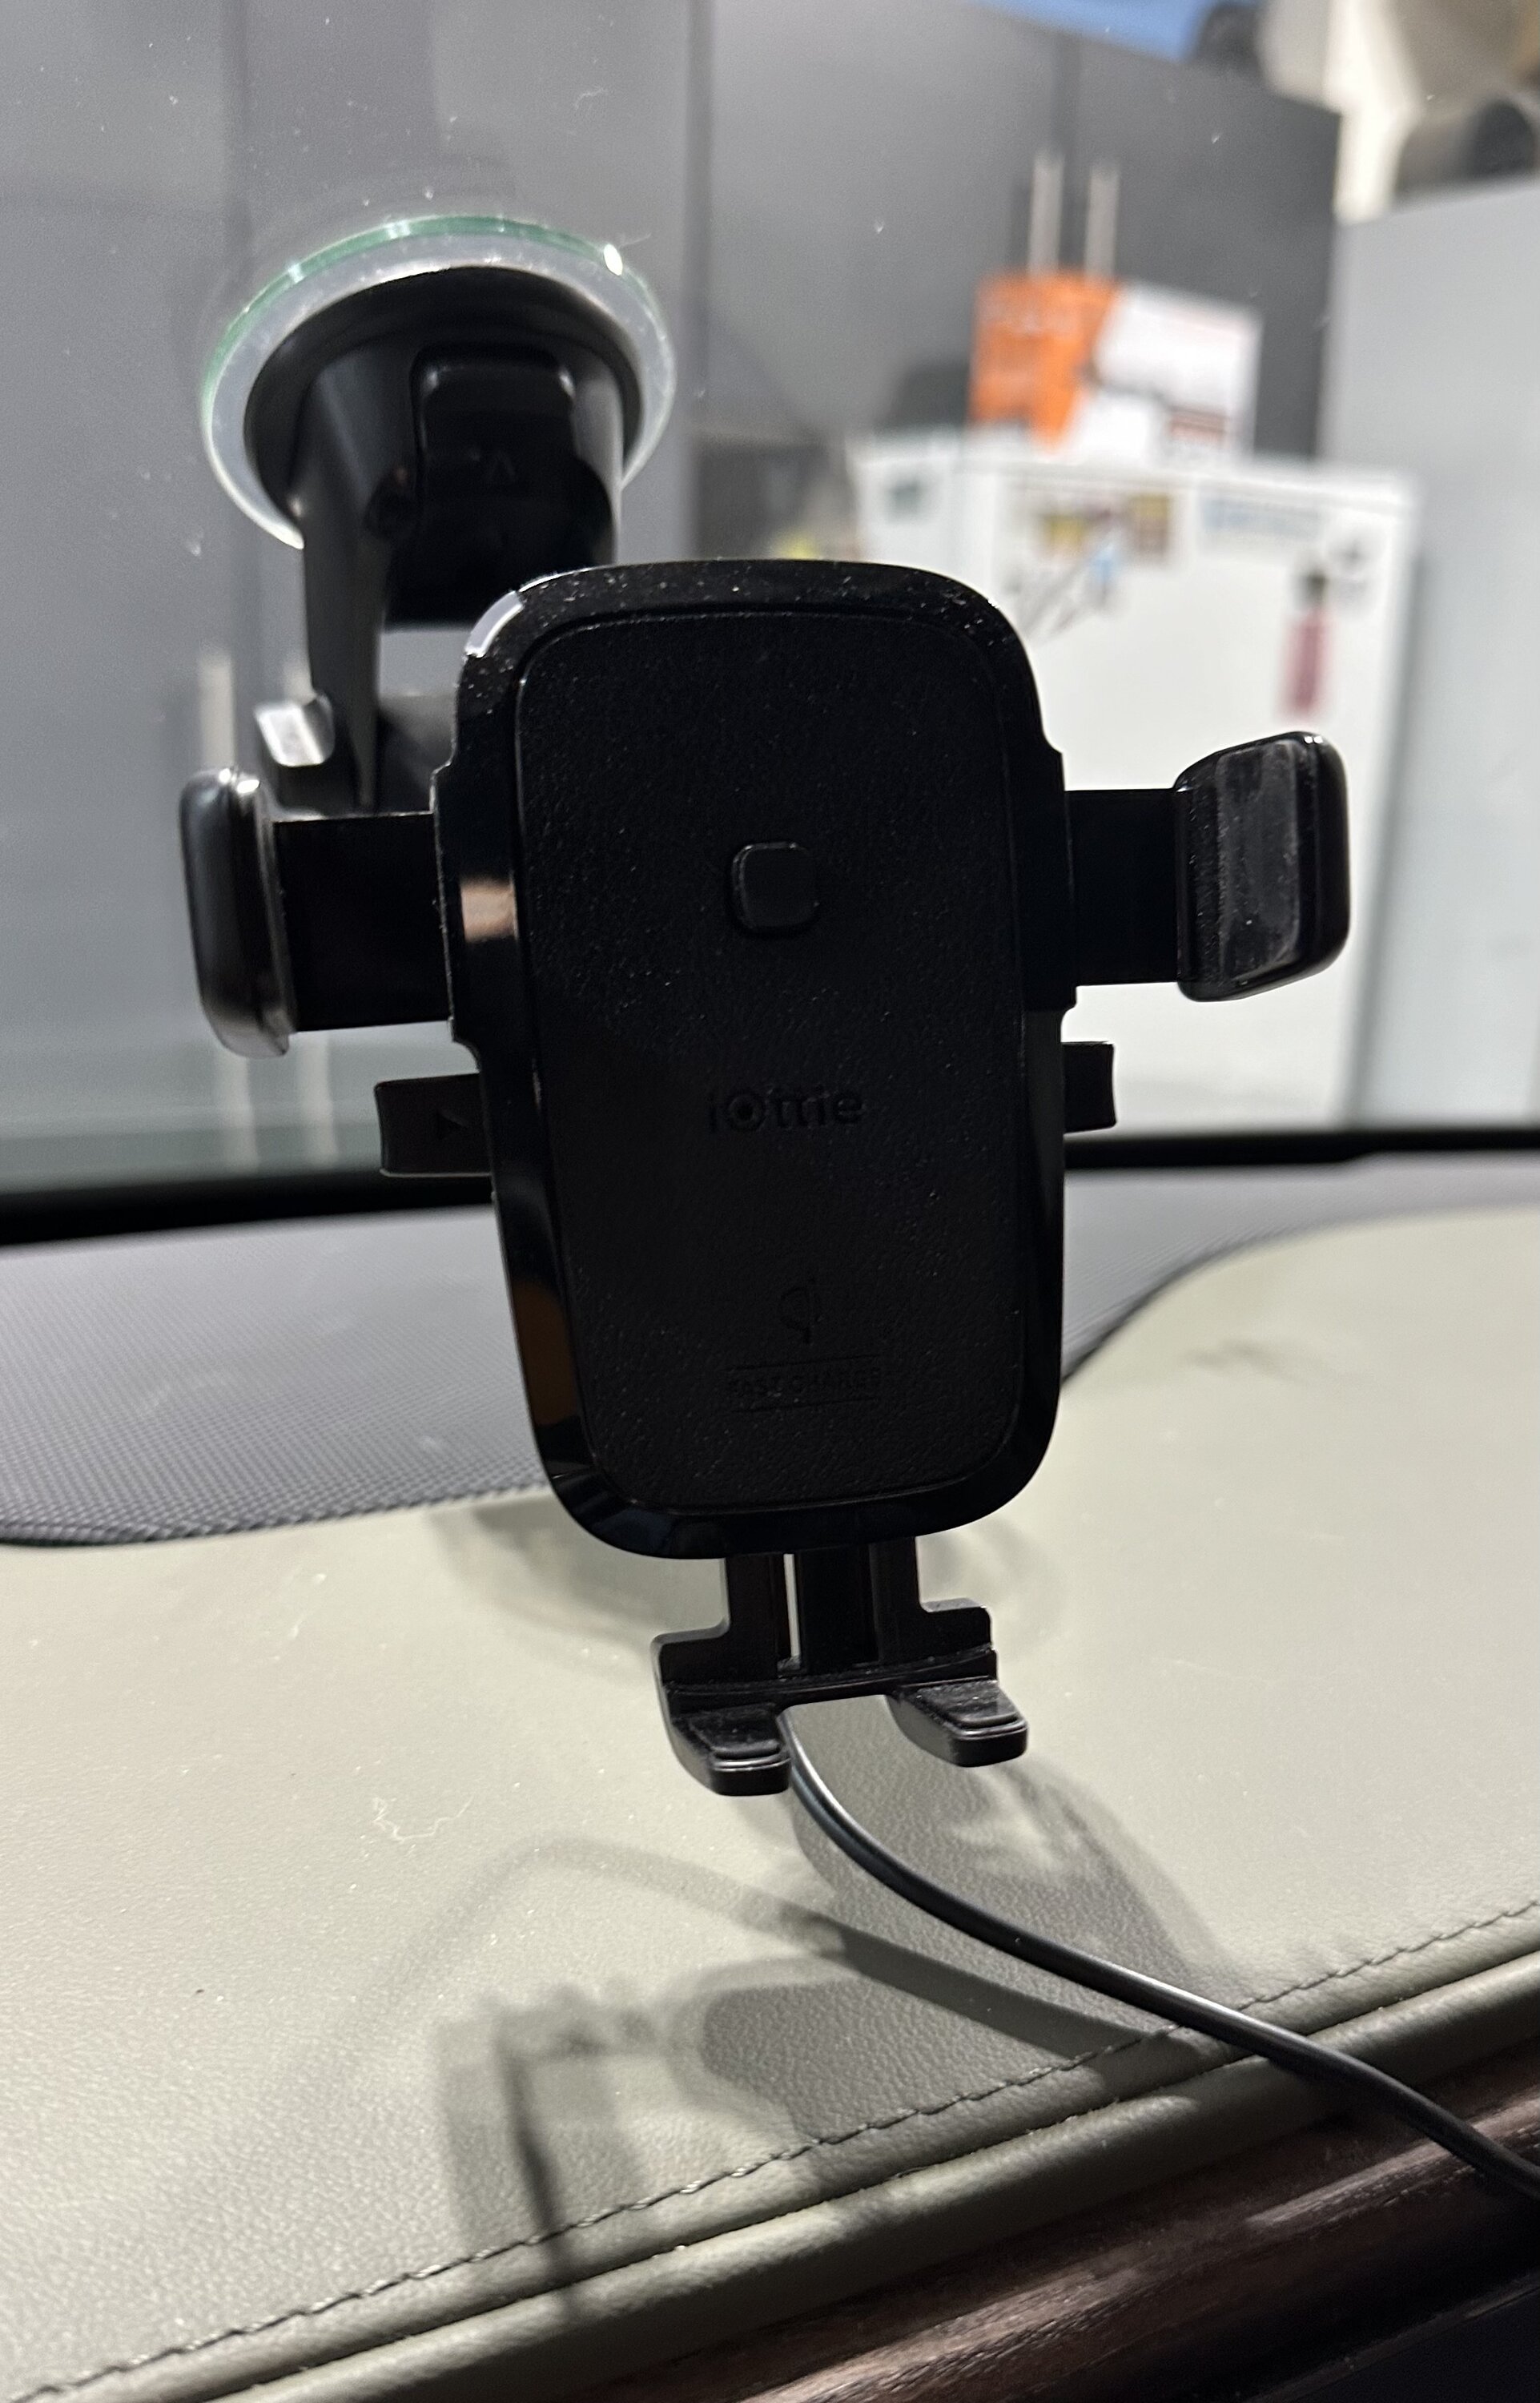 Good solution for phone mount -  Forums